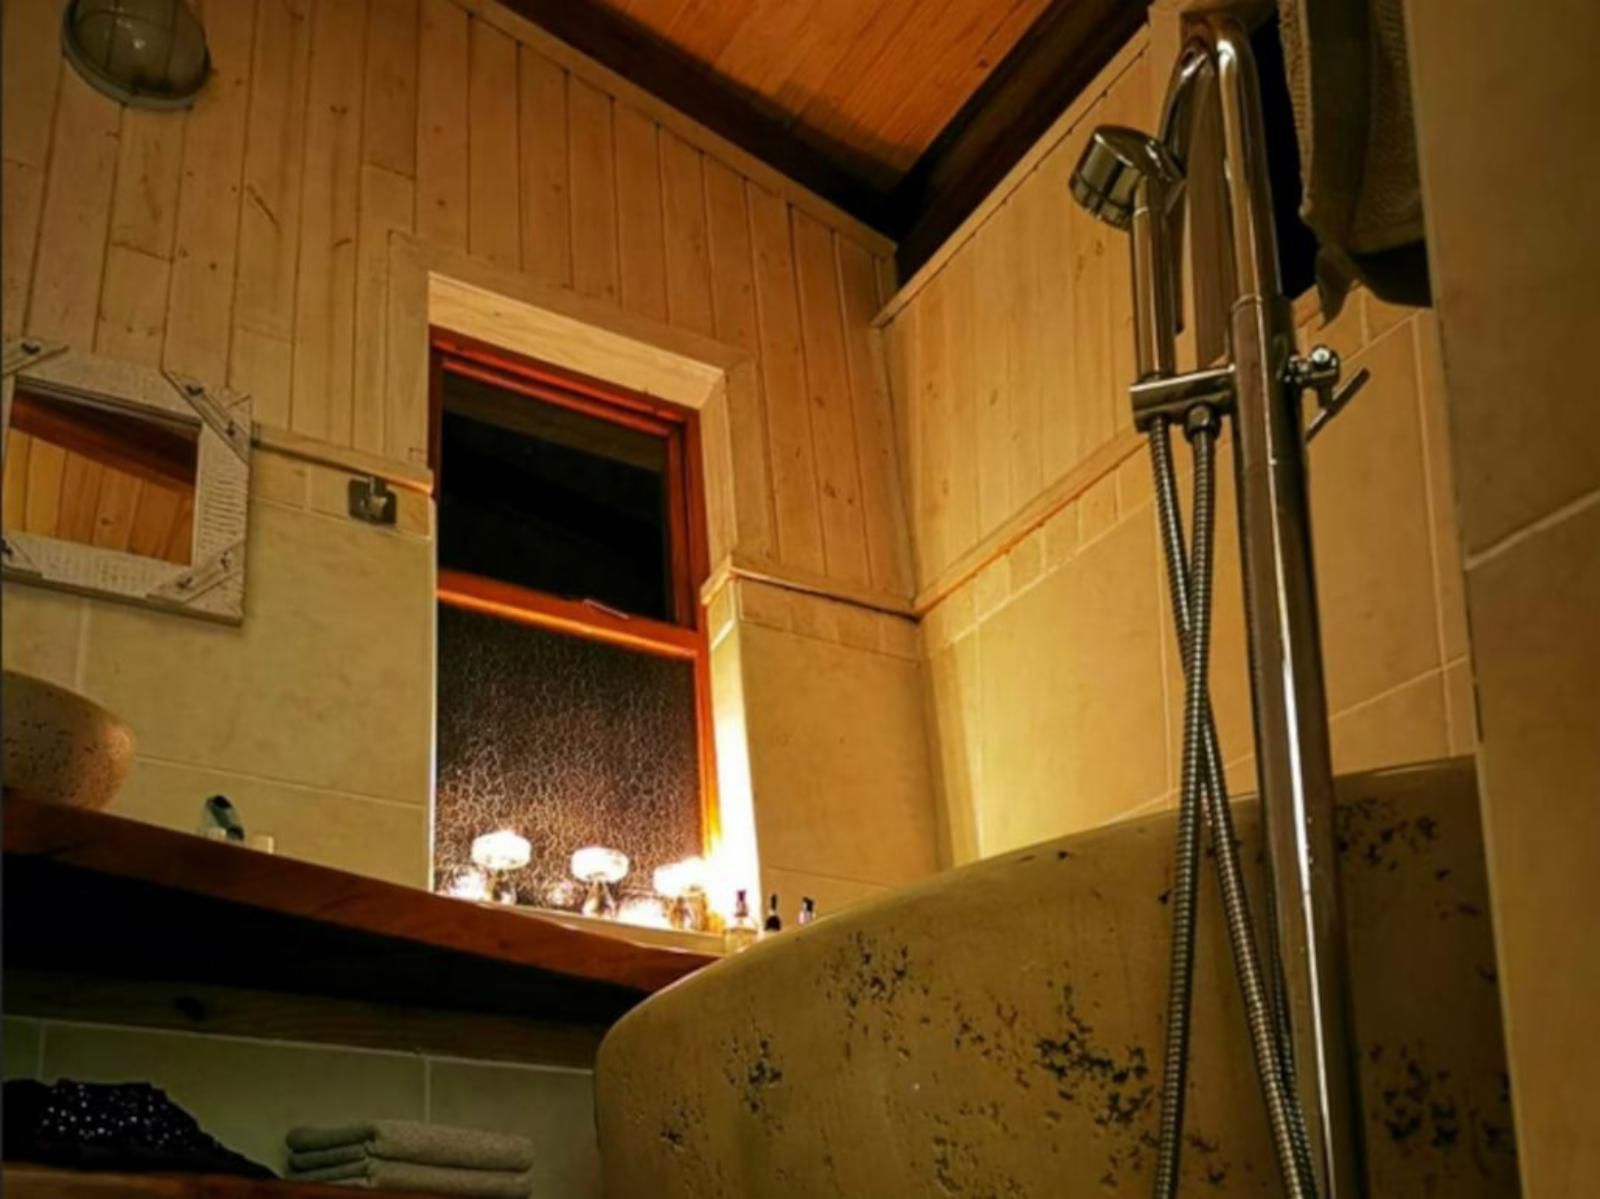 Waterbessiebos Cottage Tzaneen Limpopo Province South Africa Sepia Tones, Bathroom